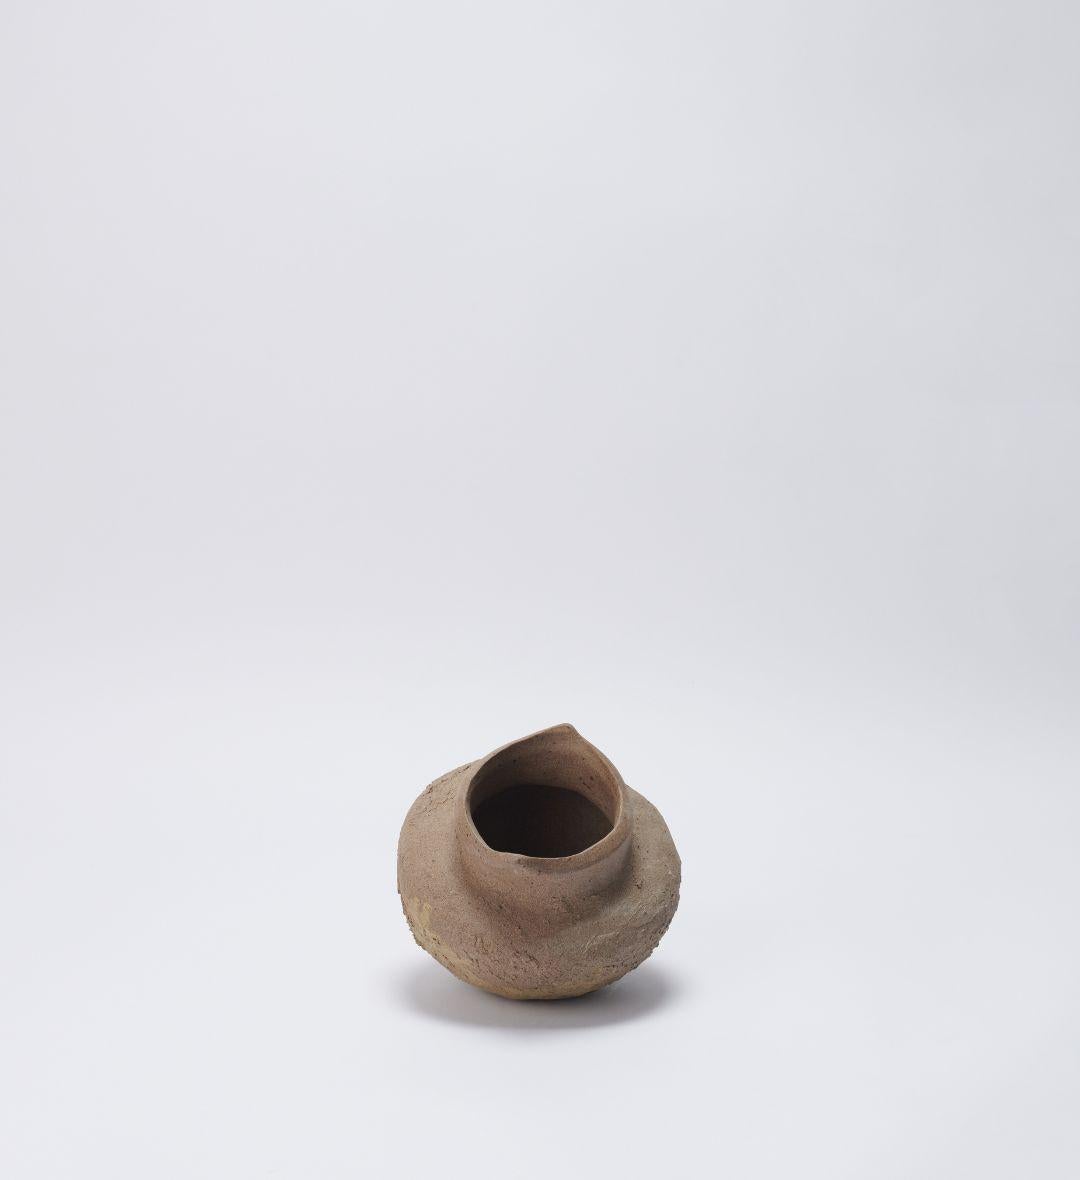 Other Poured Vessel 06 by Joana Kieppe For Sale